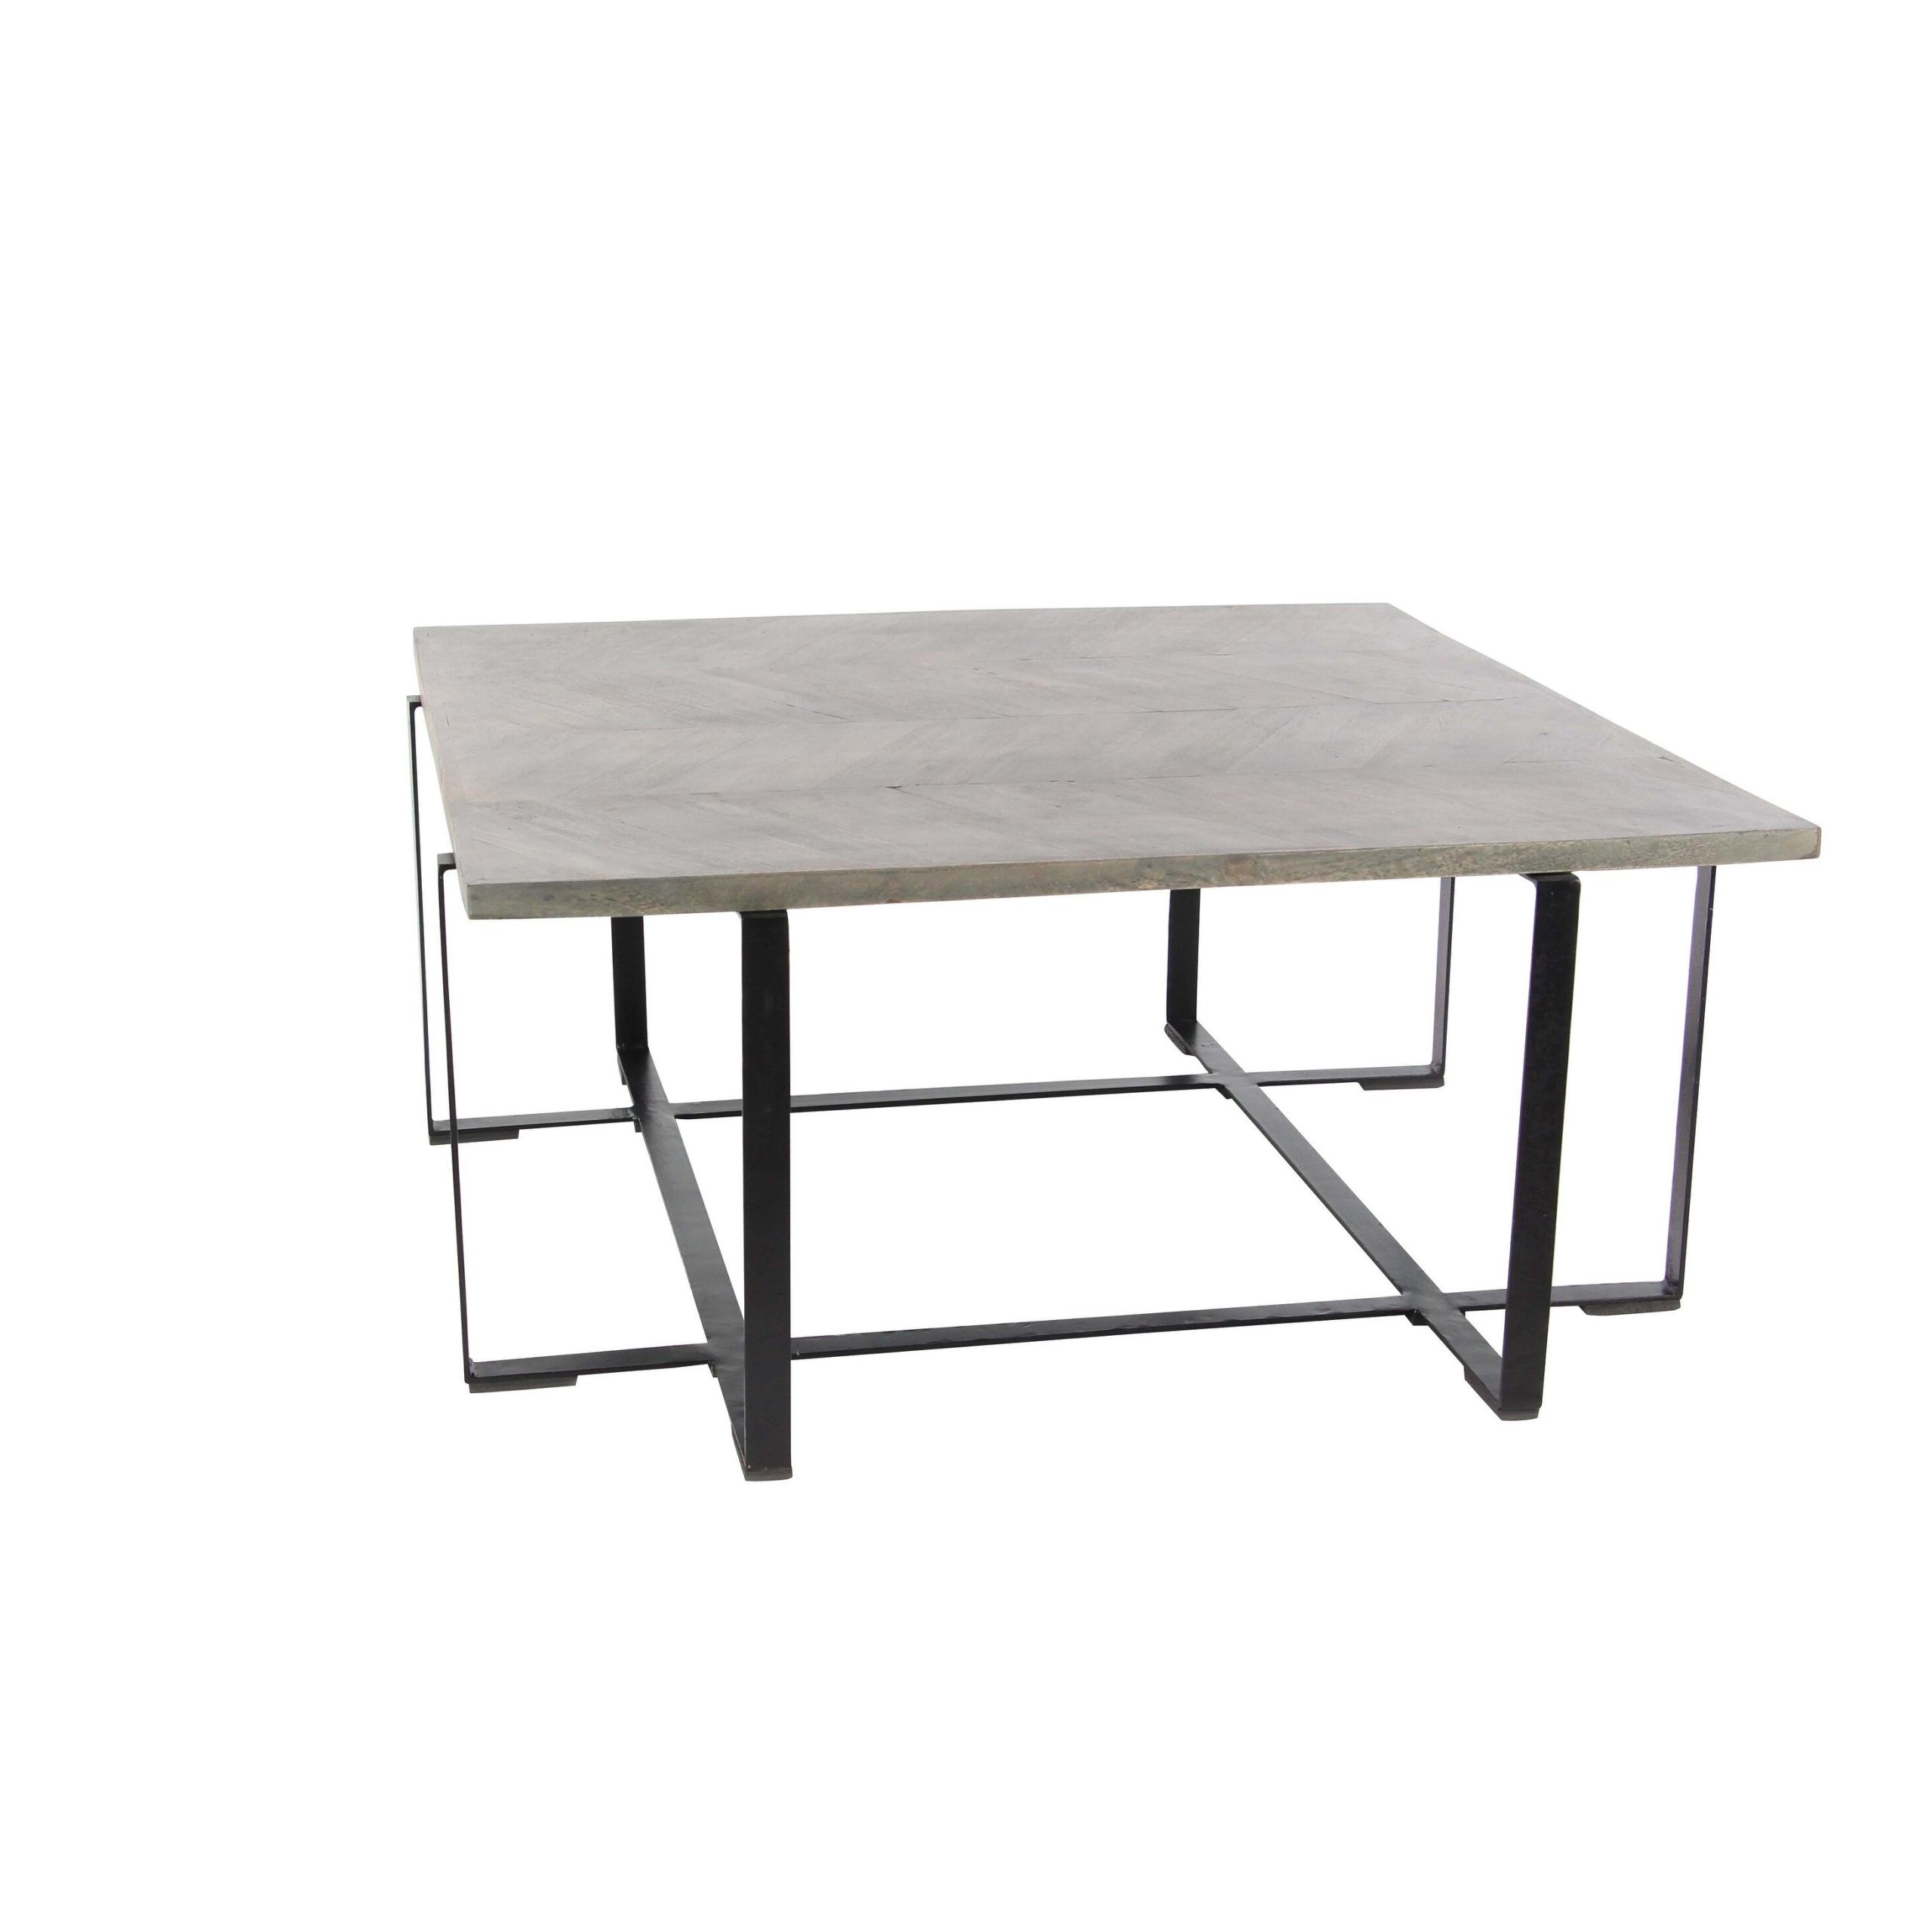 Contemporary 16 X 36 Inch Square Wooden Coffee Tablestudio 350 – Bed  Bath & Beyond – 19559544 Inside Studio 350 Black Metal Coffee Tables (View 12 of 15)